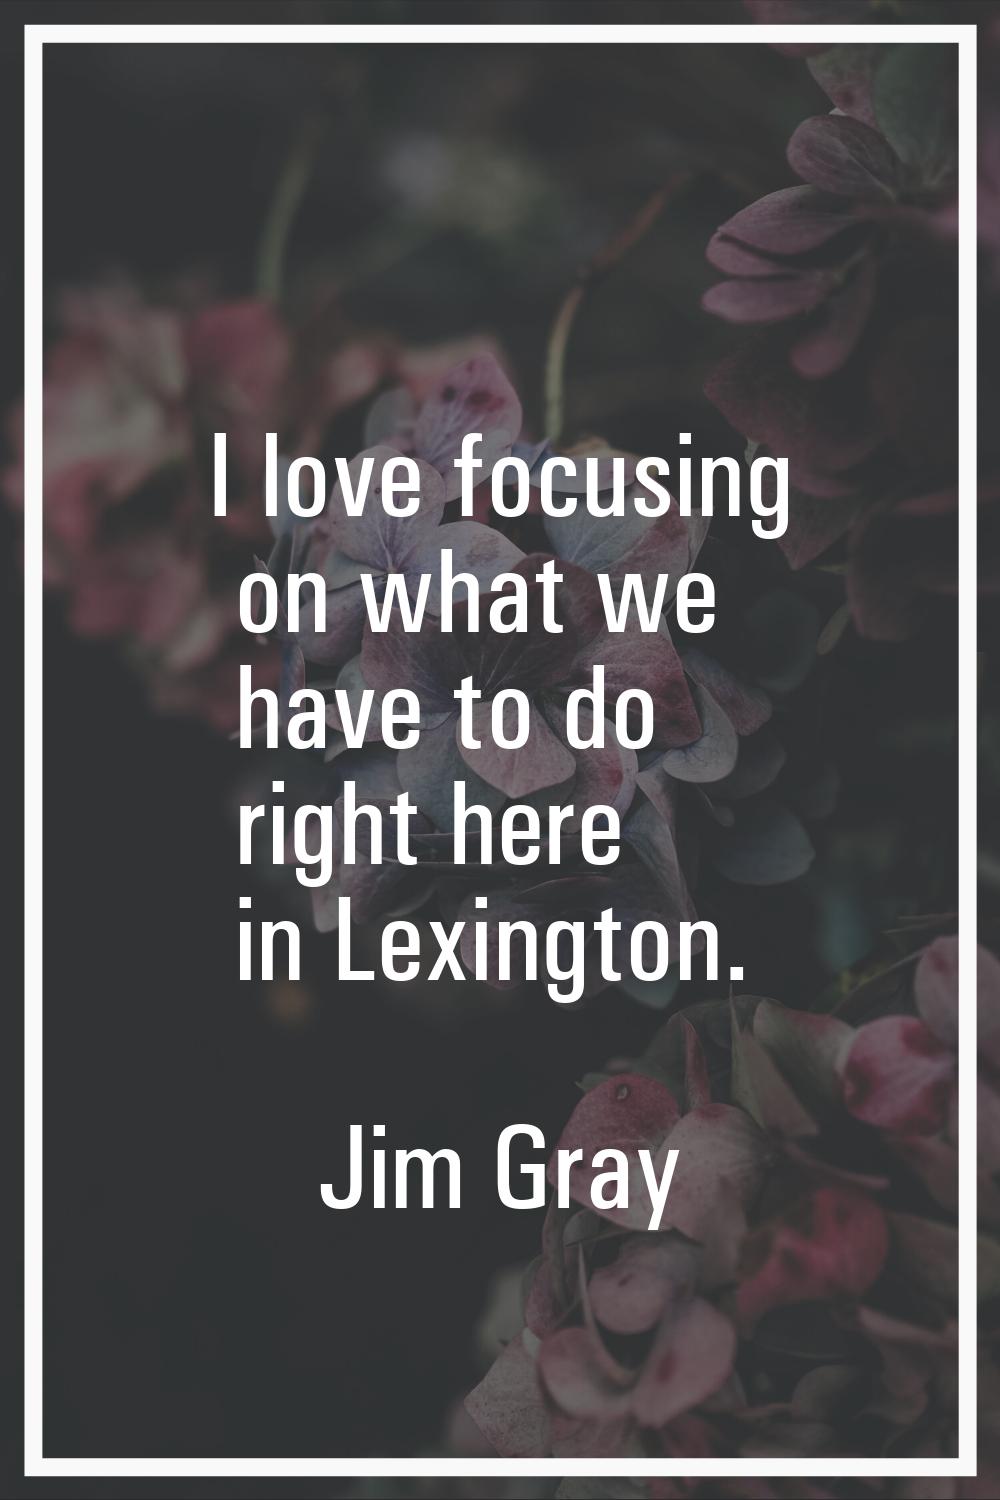 I love focusing on what we have to do right here in Lexington.